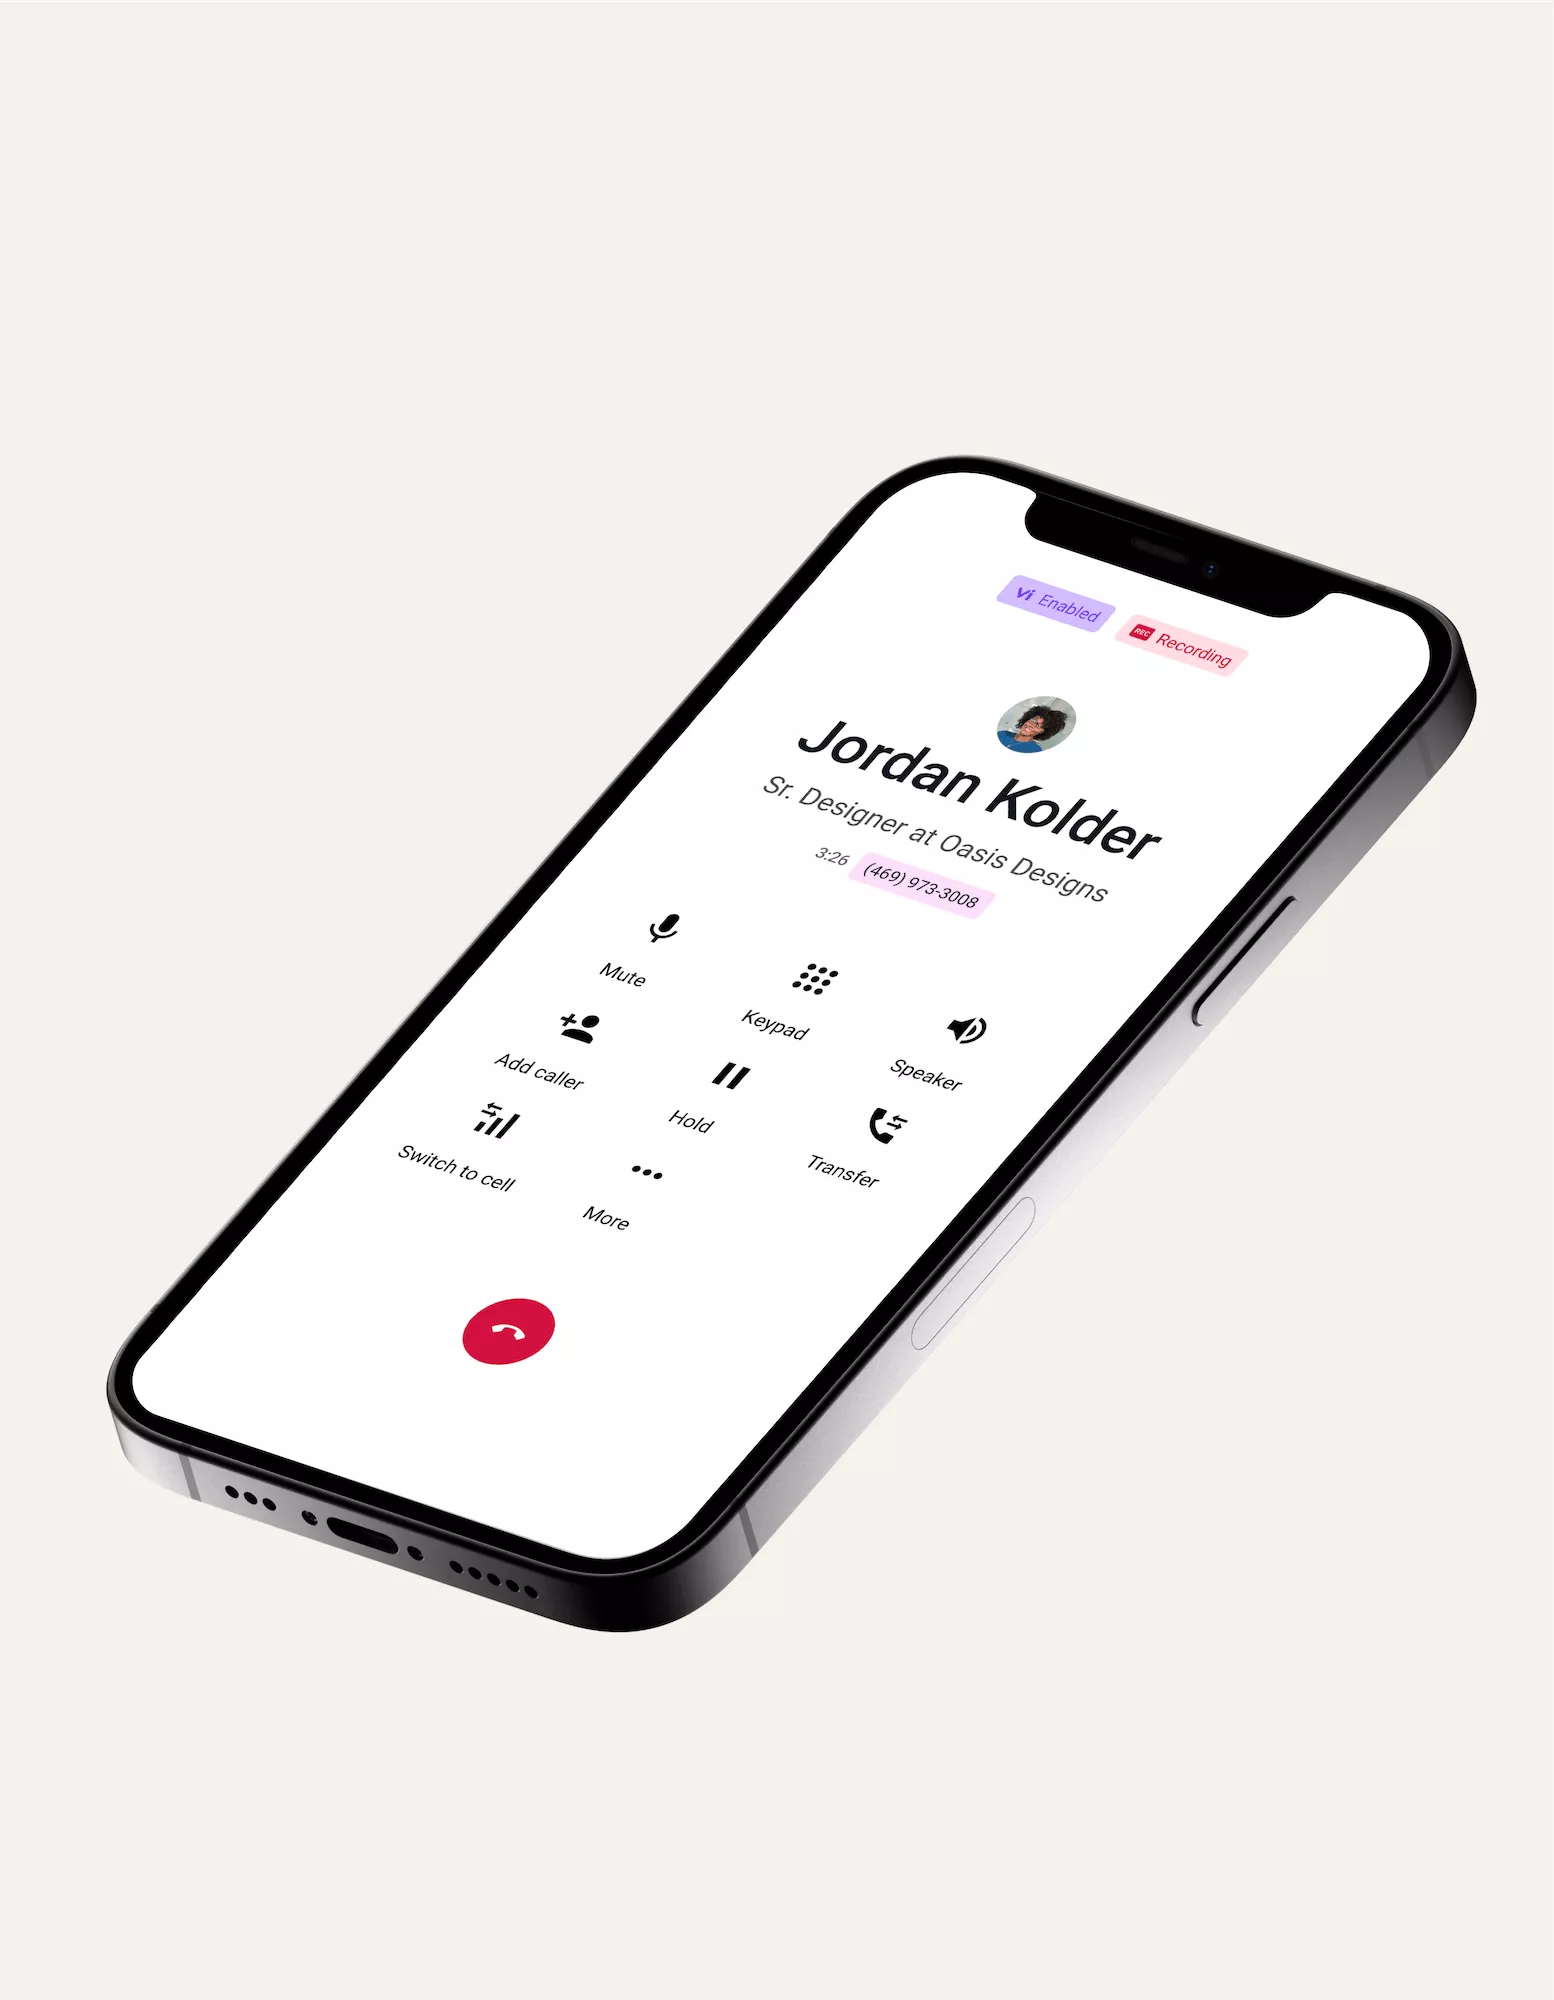 Photo of a phone with a phone number being dialed in Dialpad's mobile app